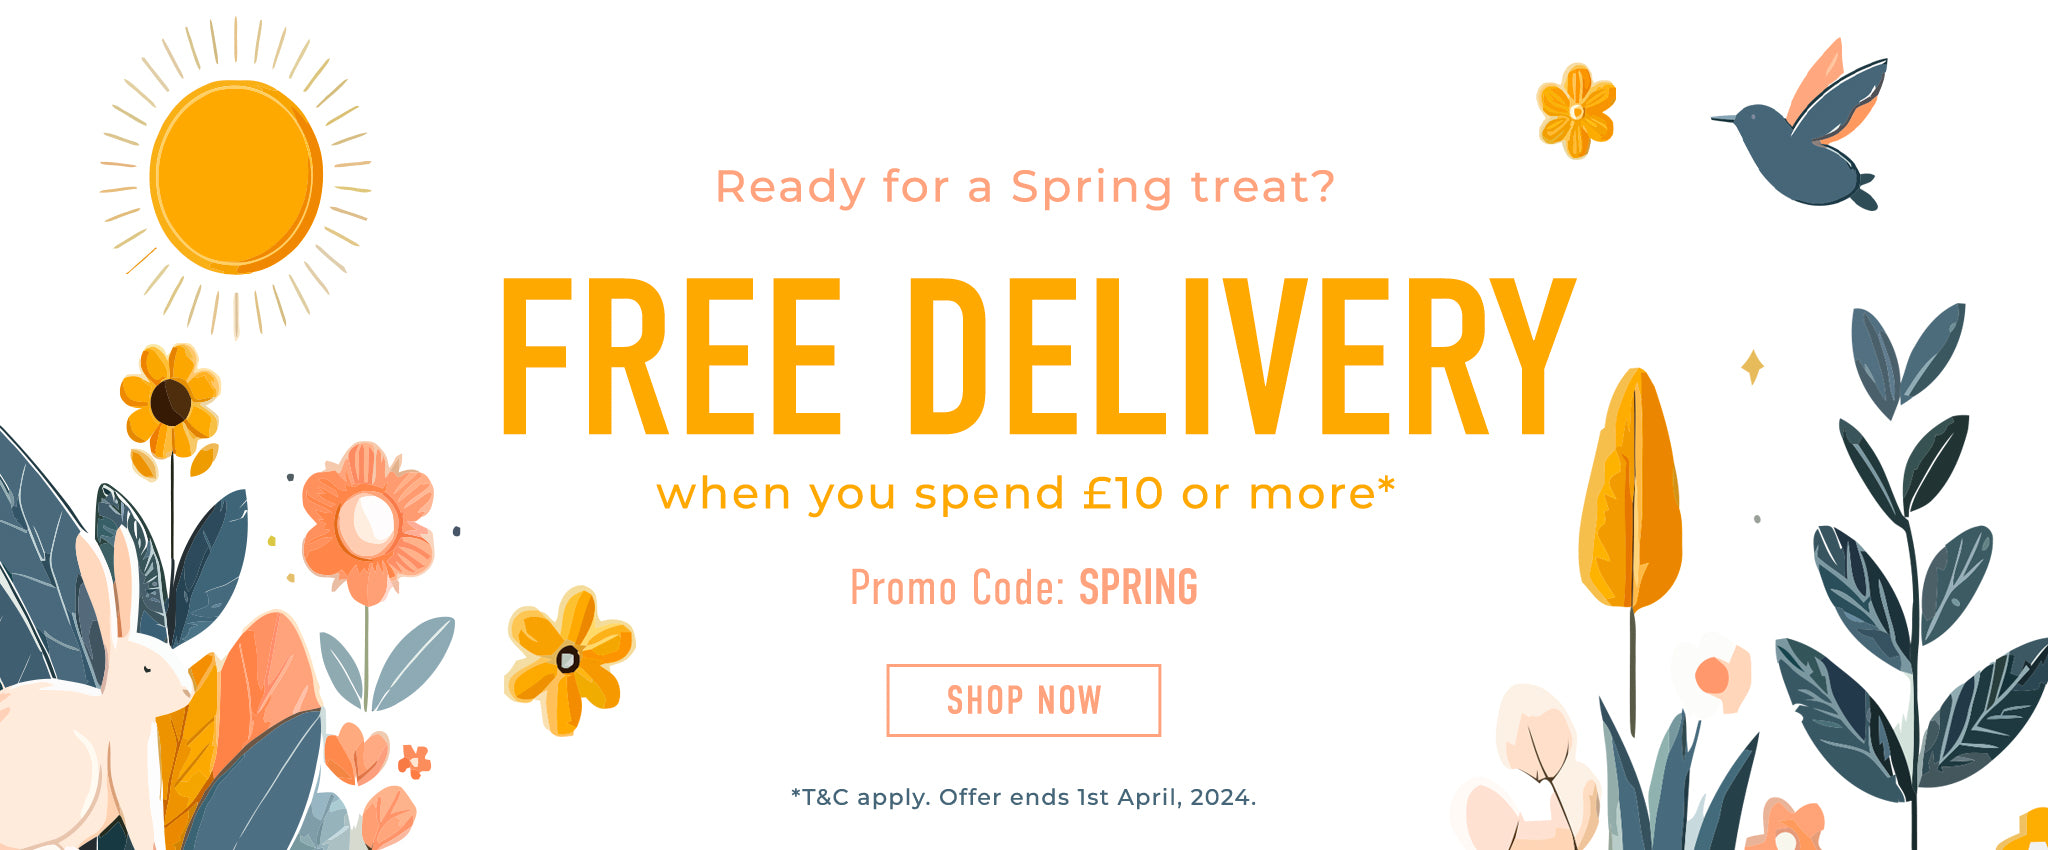 Free delivery when you spend £10 or more. Use code SPRING